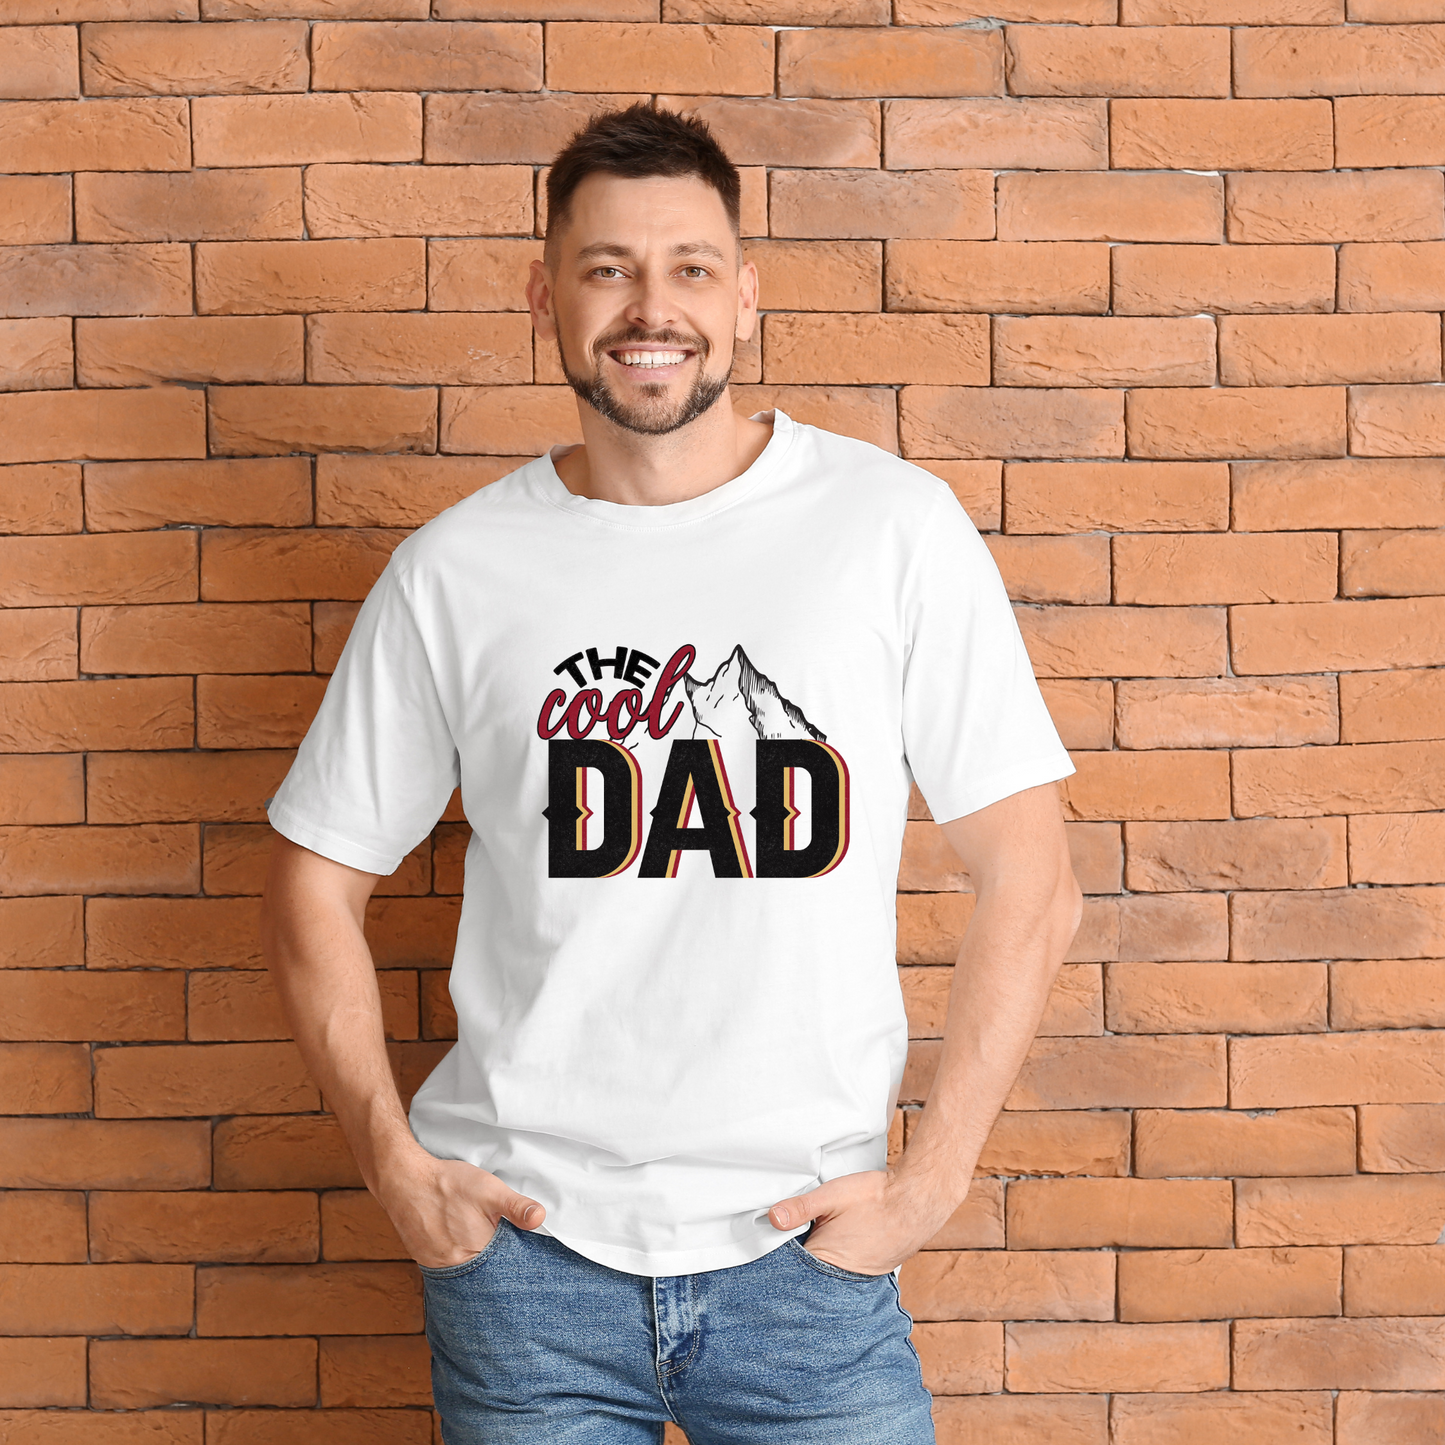 "The Cool Dad" T-Shirt - Gift for Dad